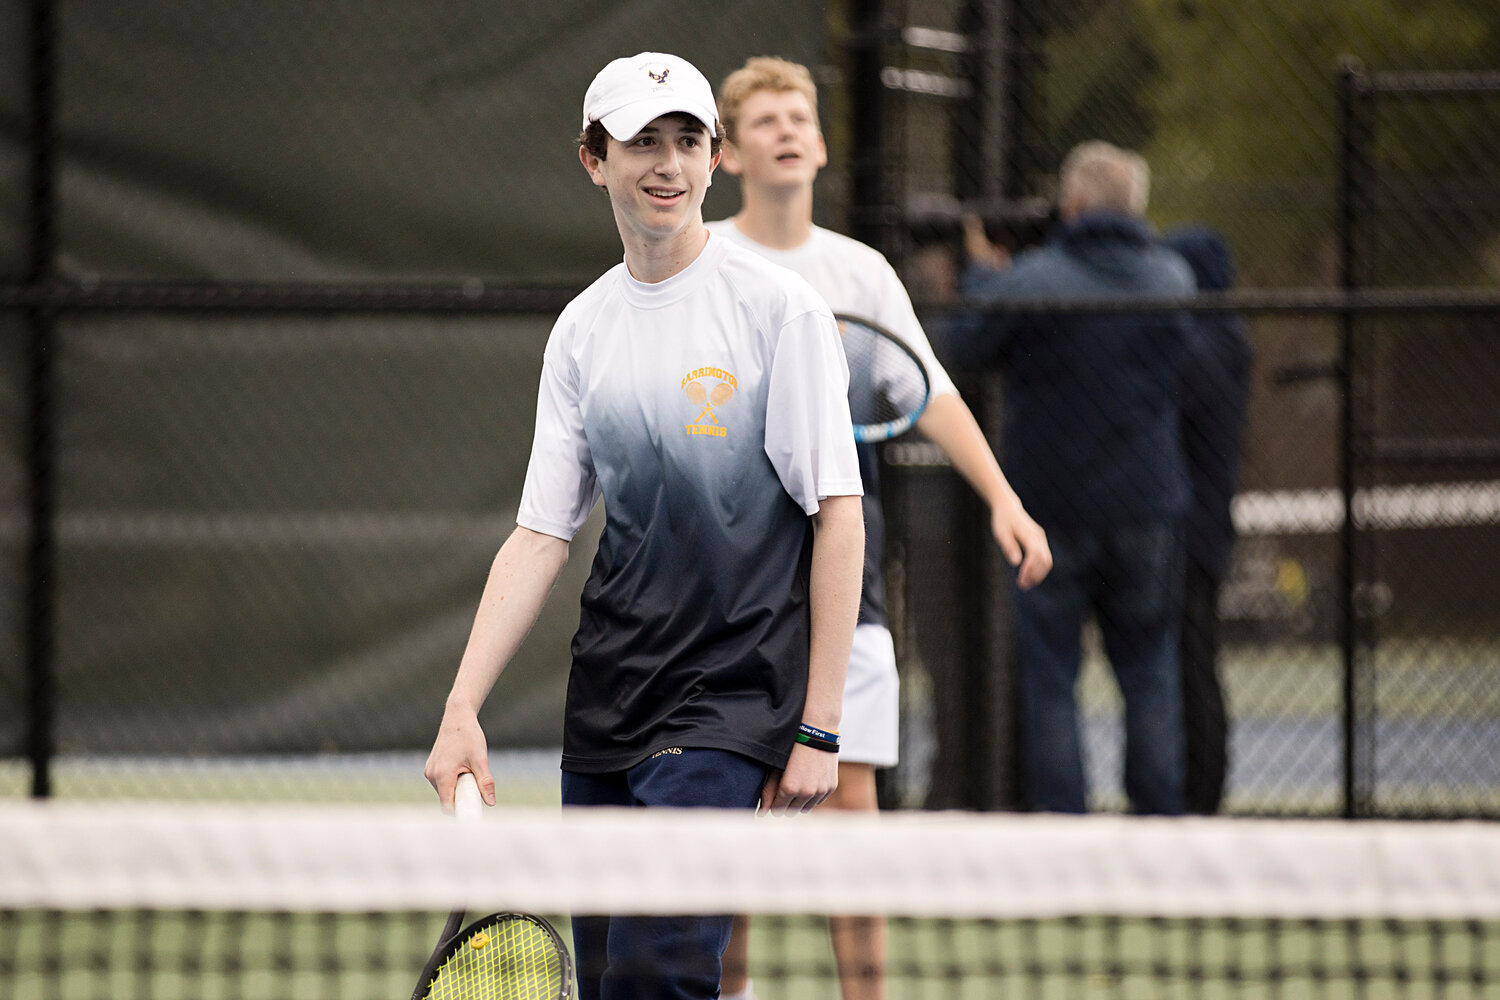 Bryce Kupperman smiles after he and teammate, Gabe Anderson, earn a point in the No. 1 doubles match.